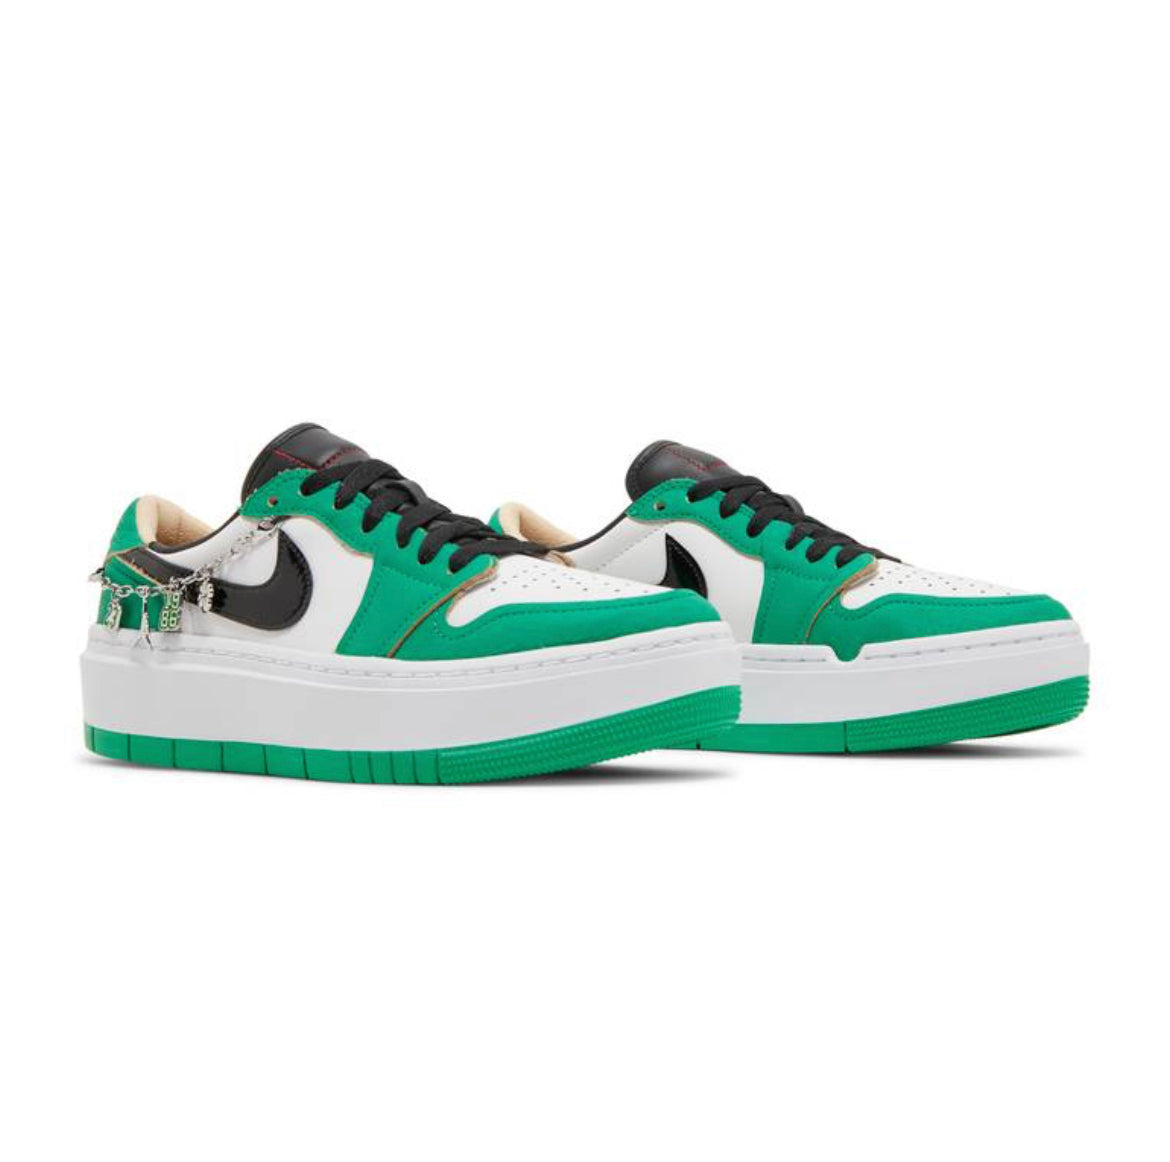 AJ1 Low Elevate ‘Lucky Green’ (W) DQ8394-301